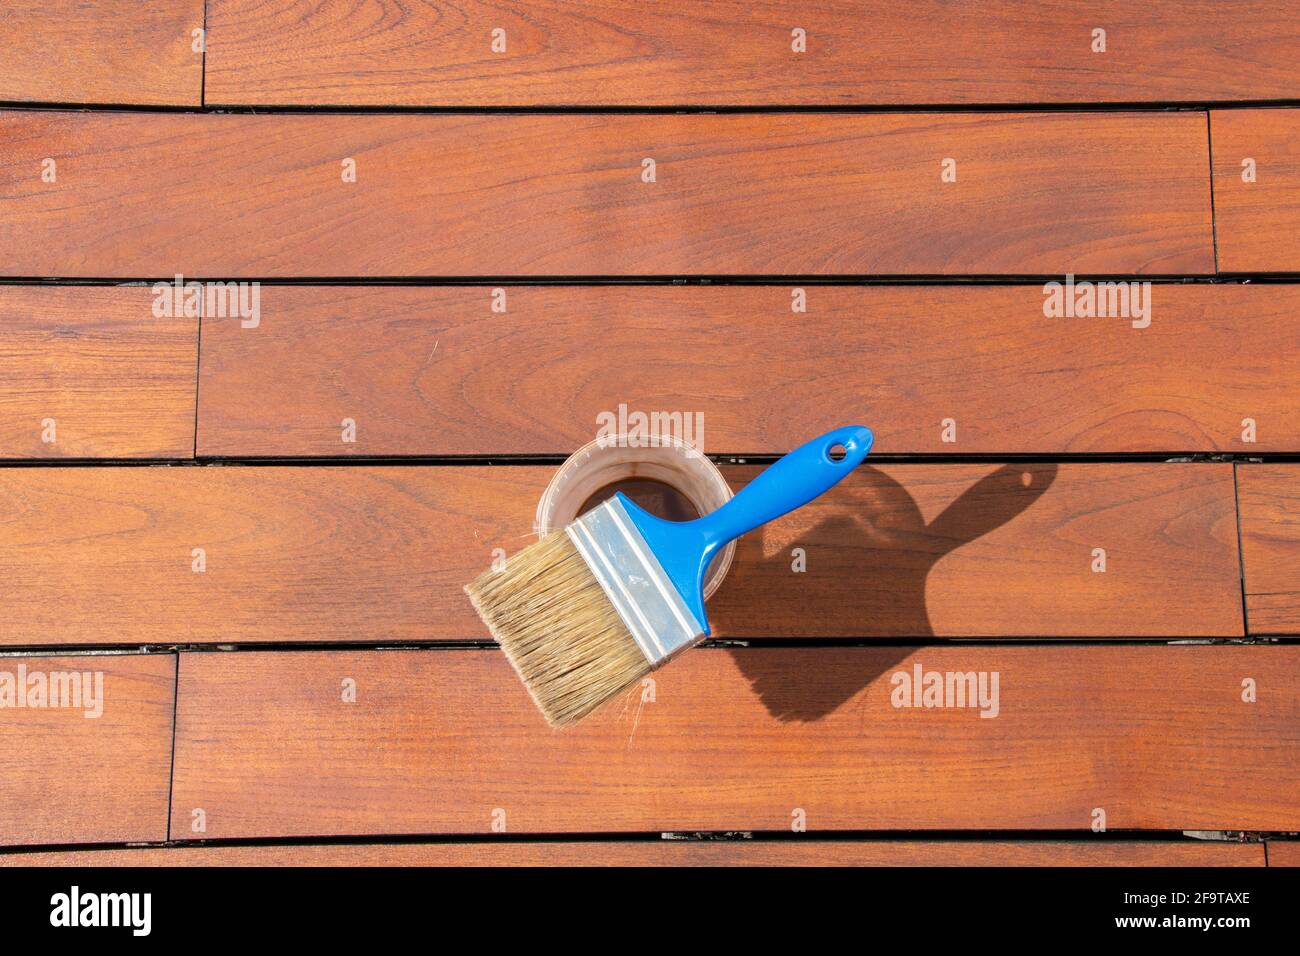 Teak wood deck renovation treatment and maintenance concept, paint brush on the bucket with oil, staining wooden decking Stock Photo